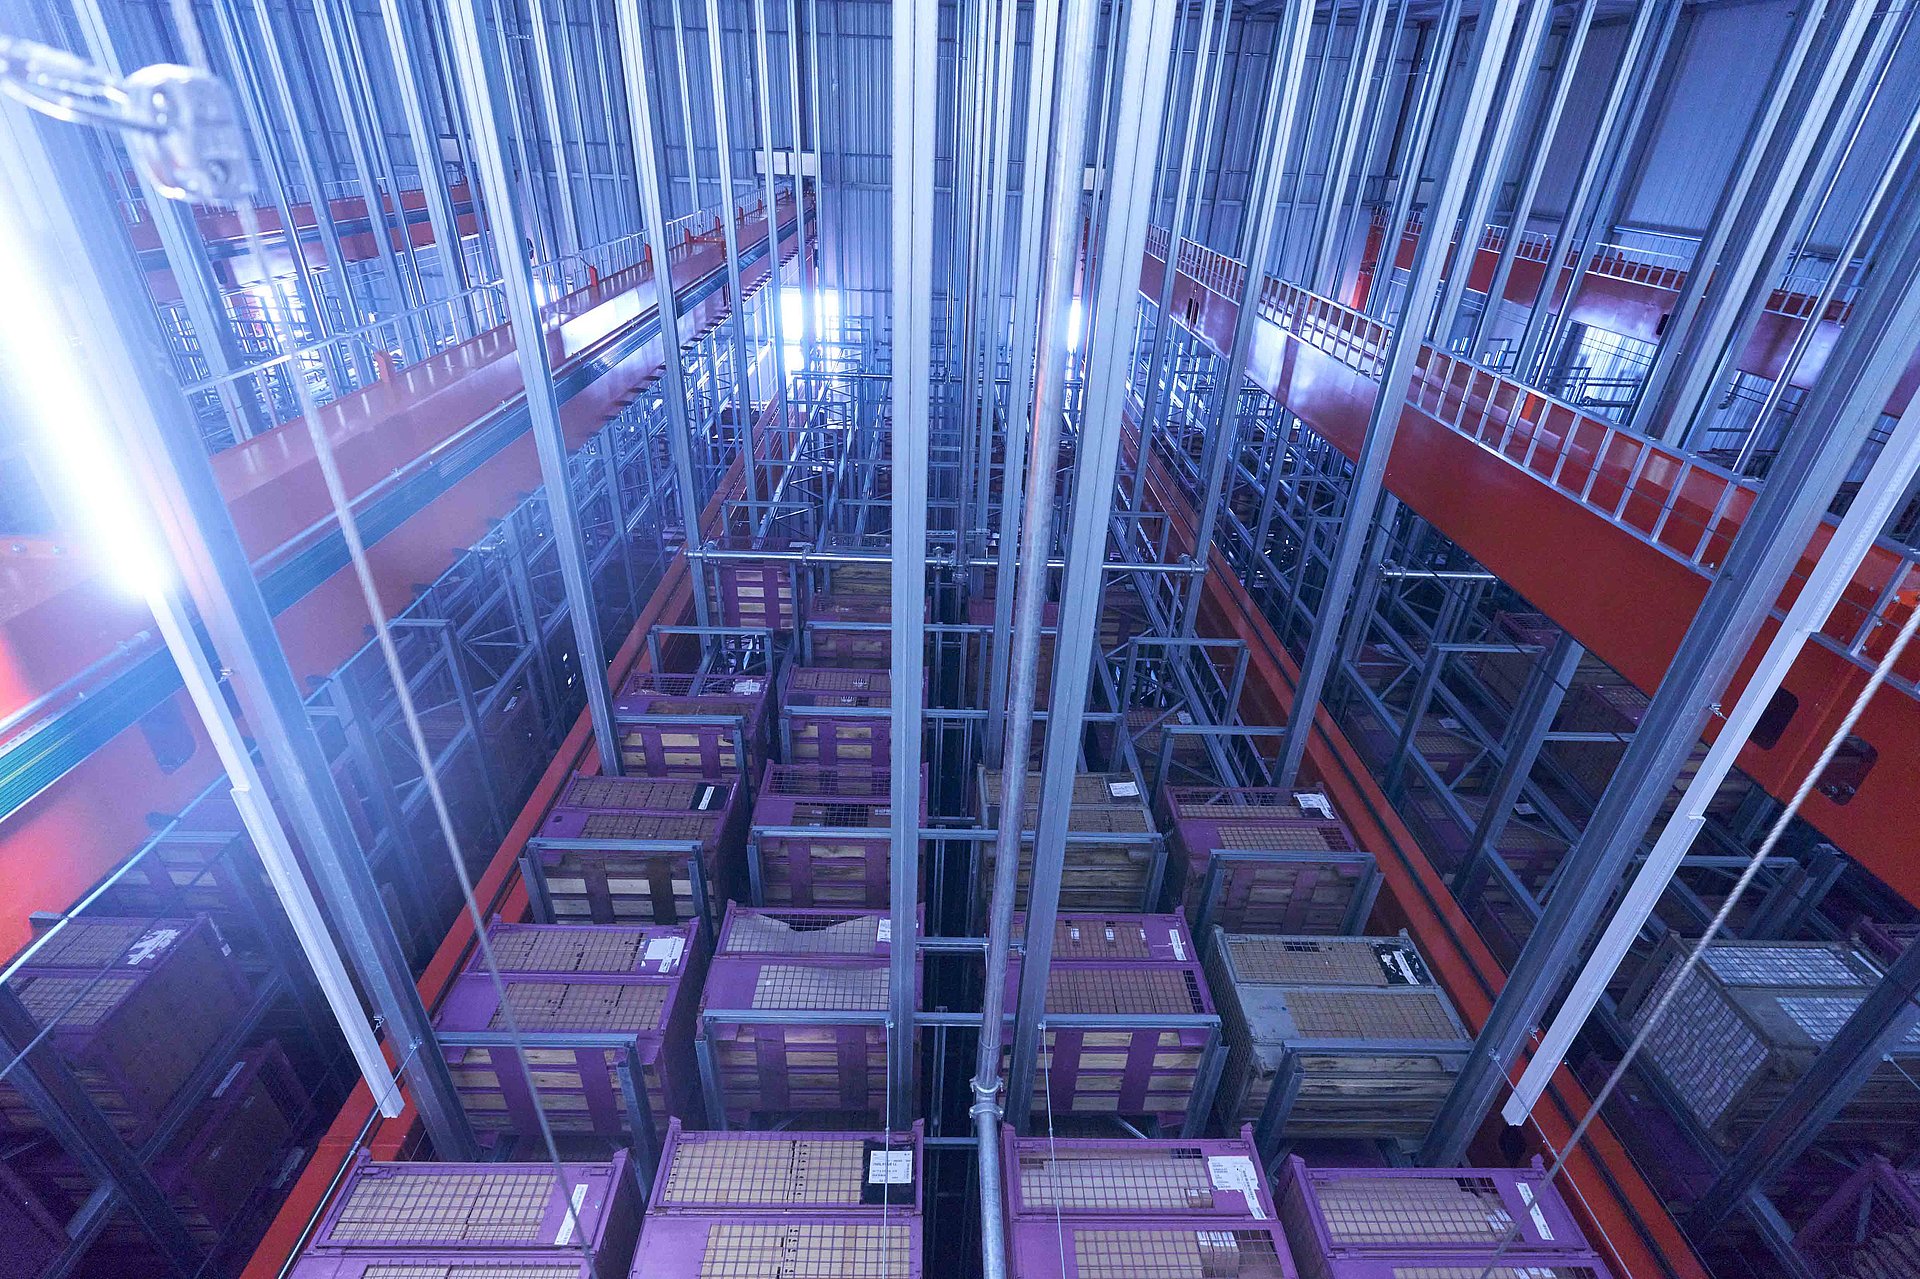 View into a high-bay warehouse system